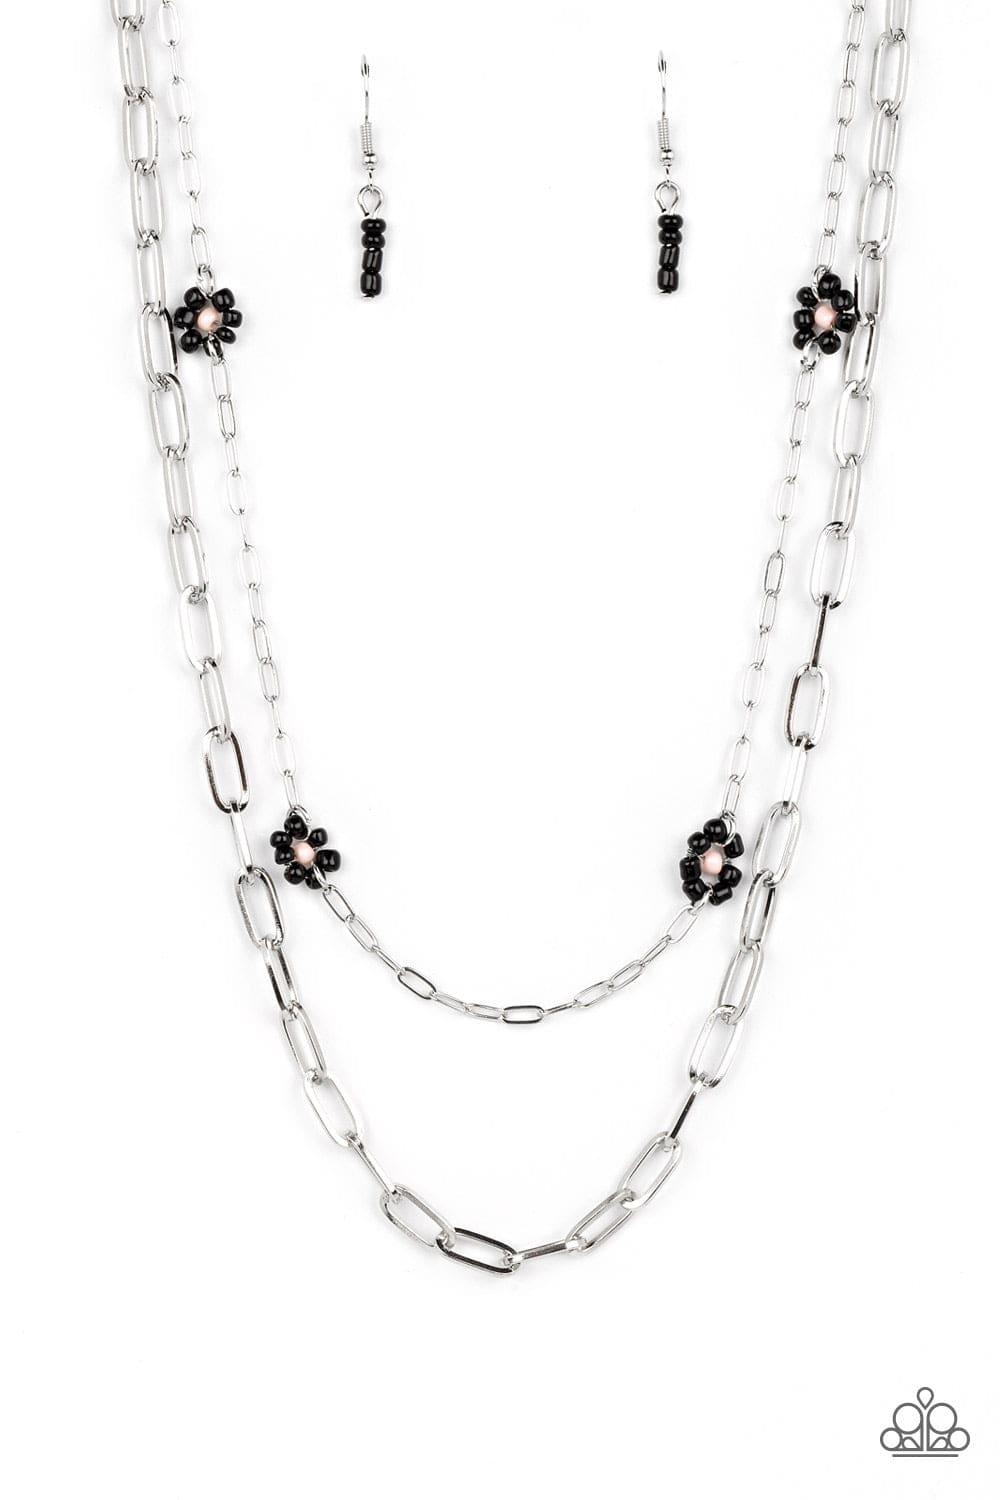 Paparazzi Accessories - Bold Buds - Black Necklace - Bling by JessieK